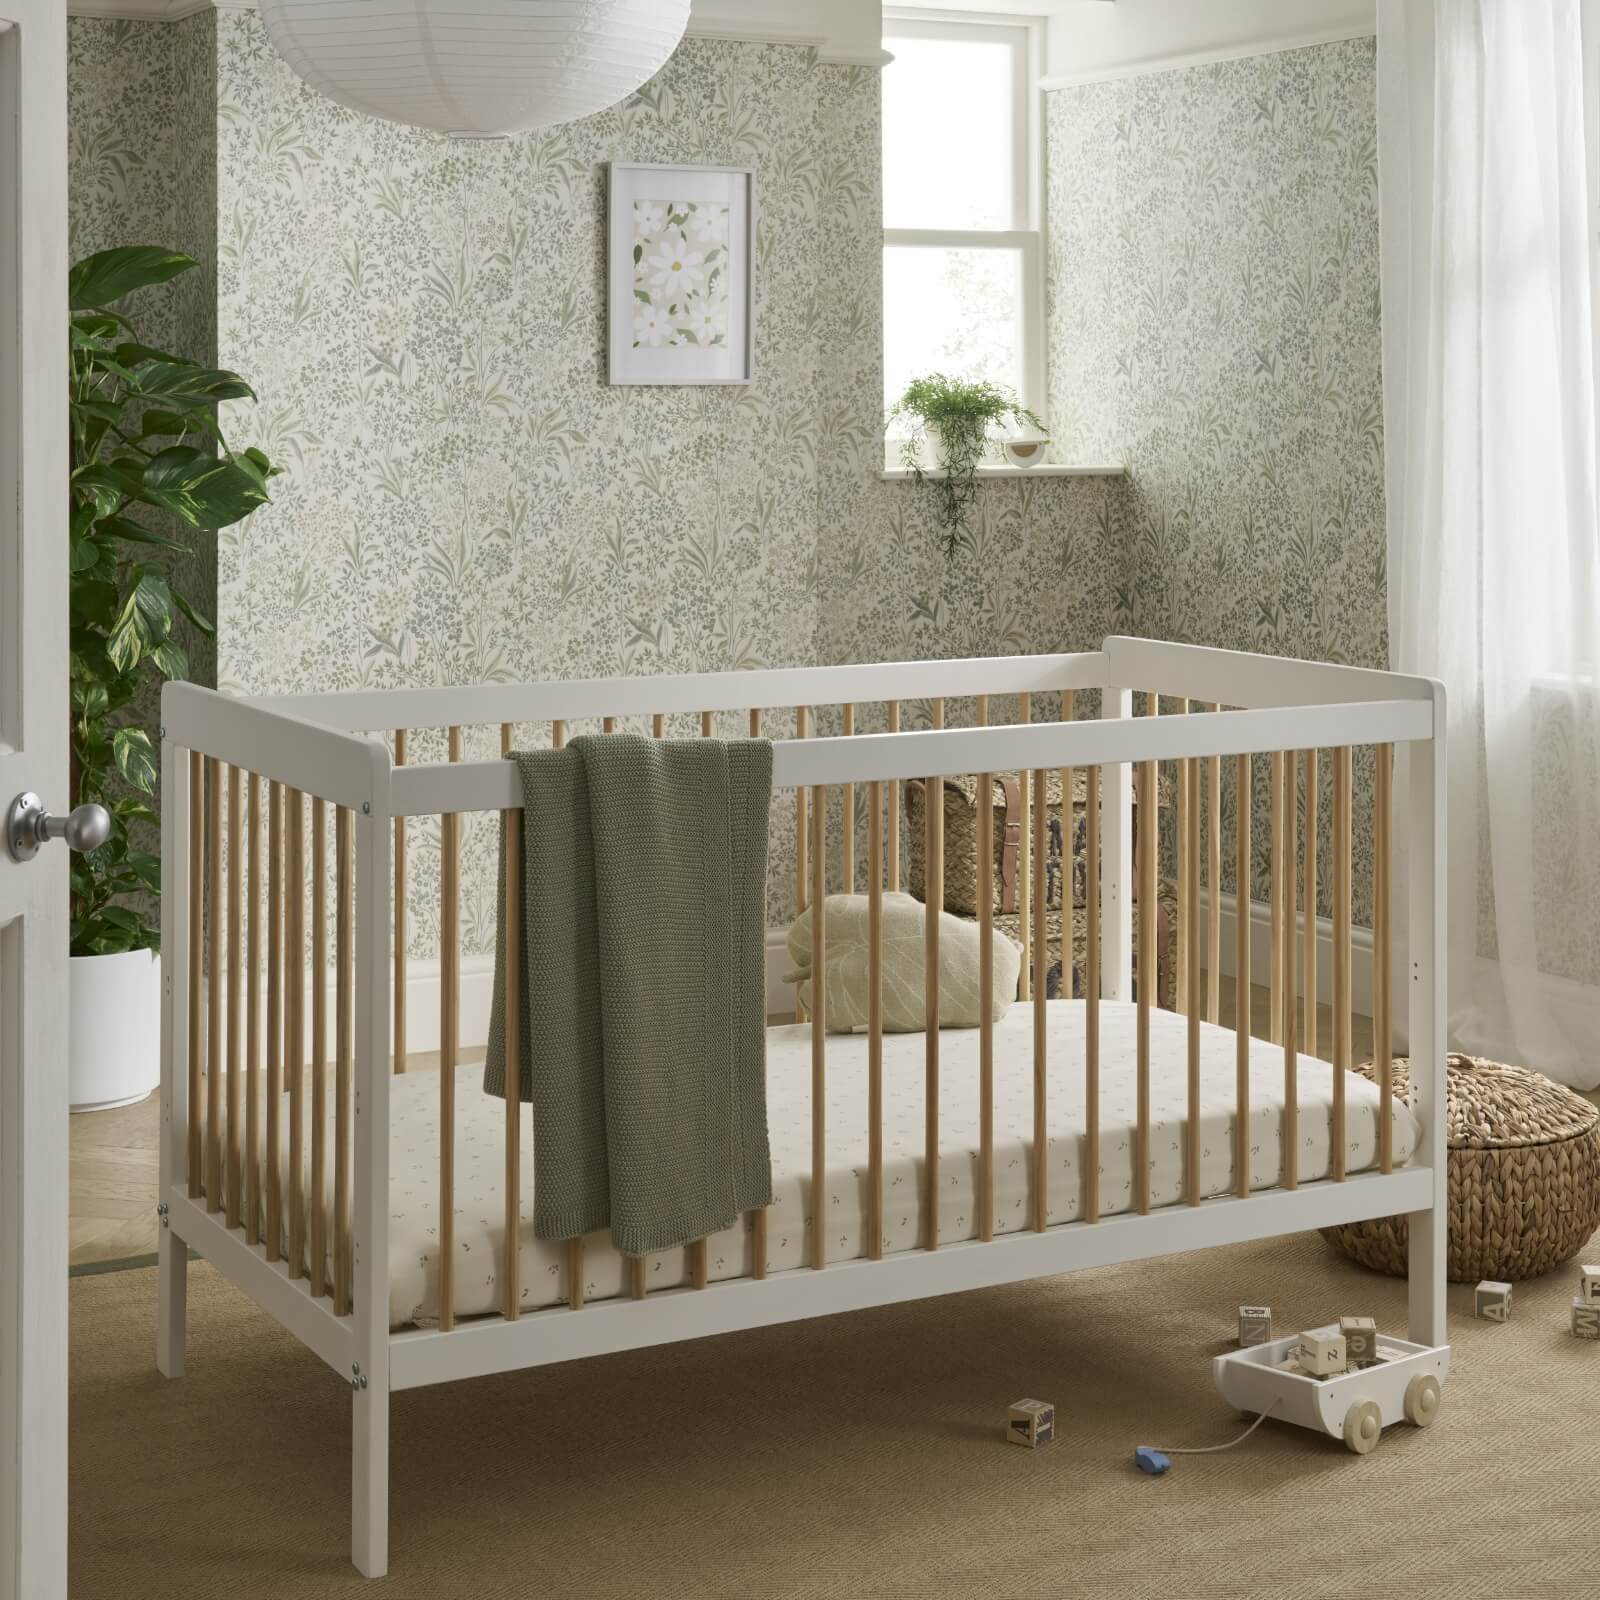 CuddleCo Nursery Room Sets CuddleCo Nola Cot Bed - White & Natural